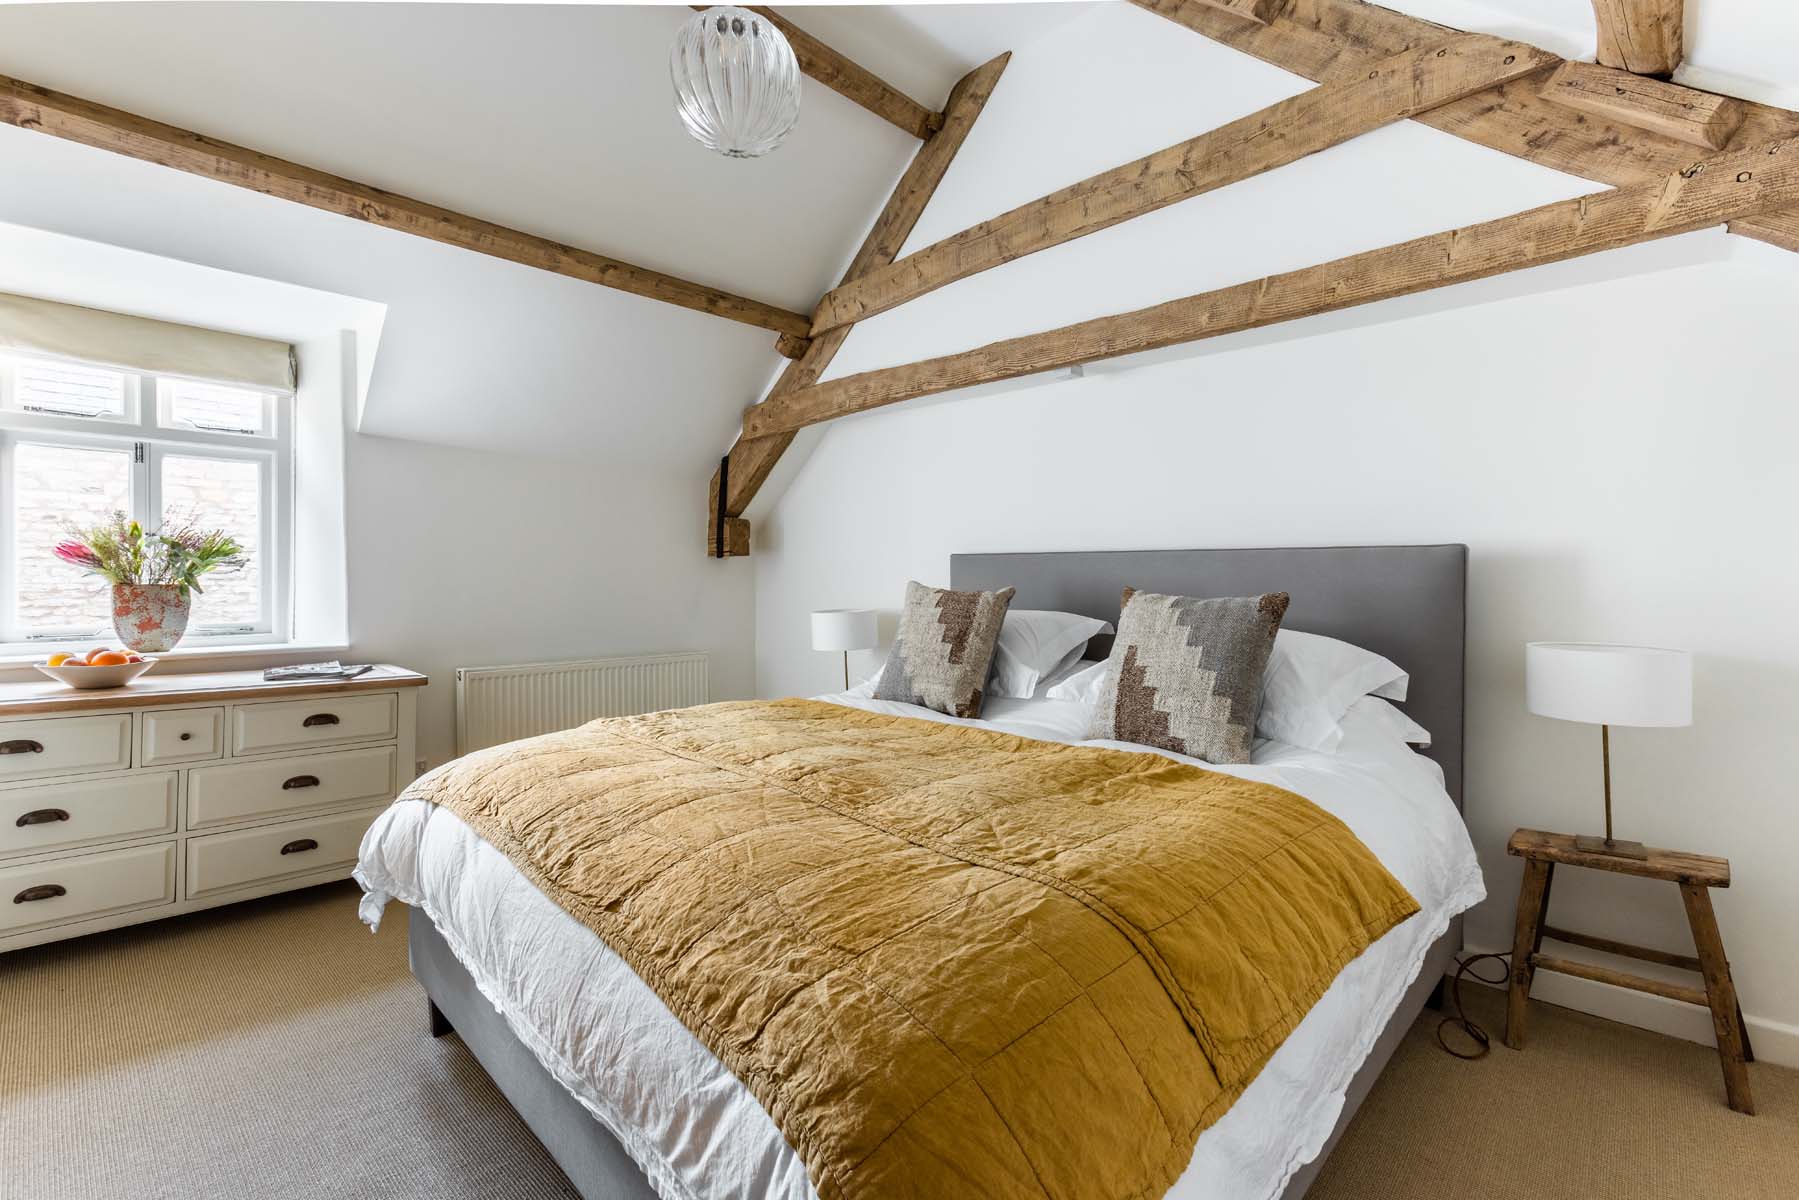 Cottage bedroom with wooden beams and white walls